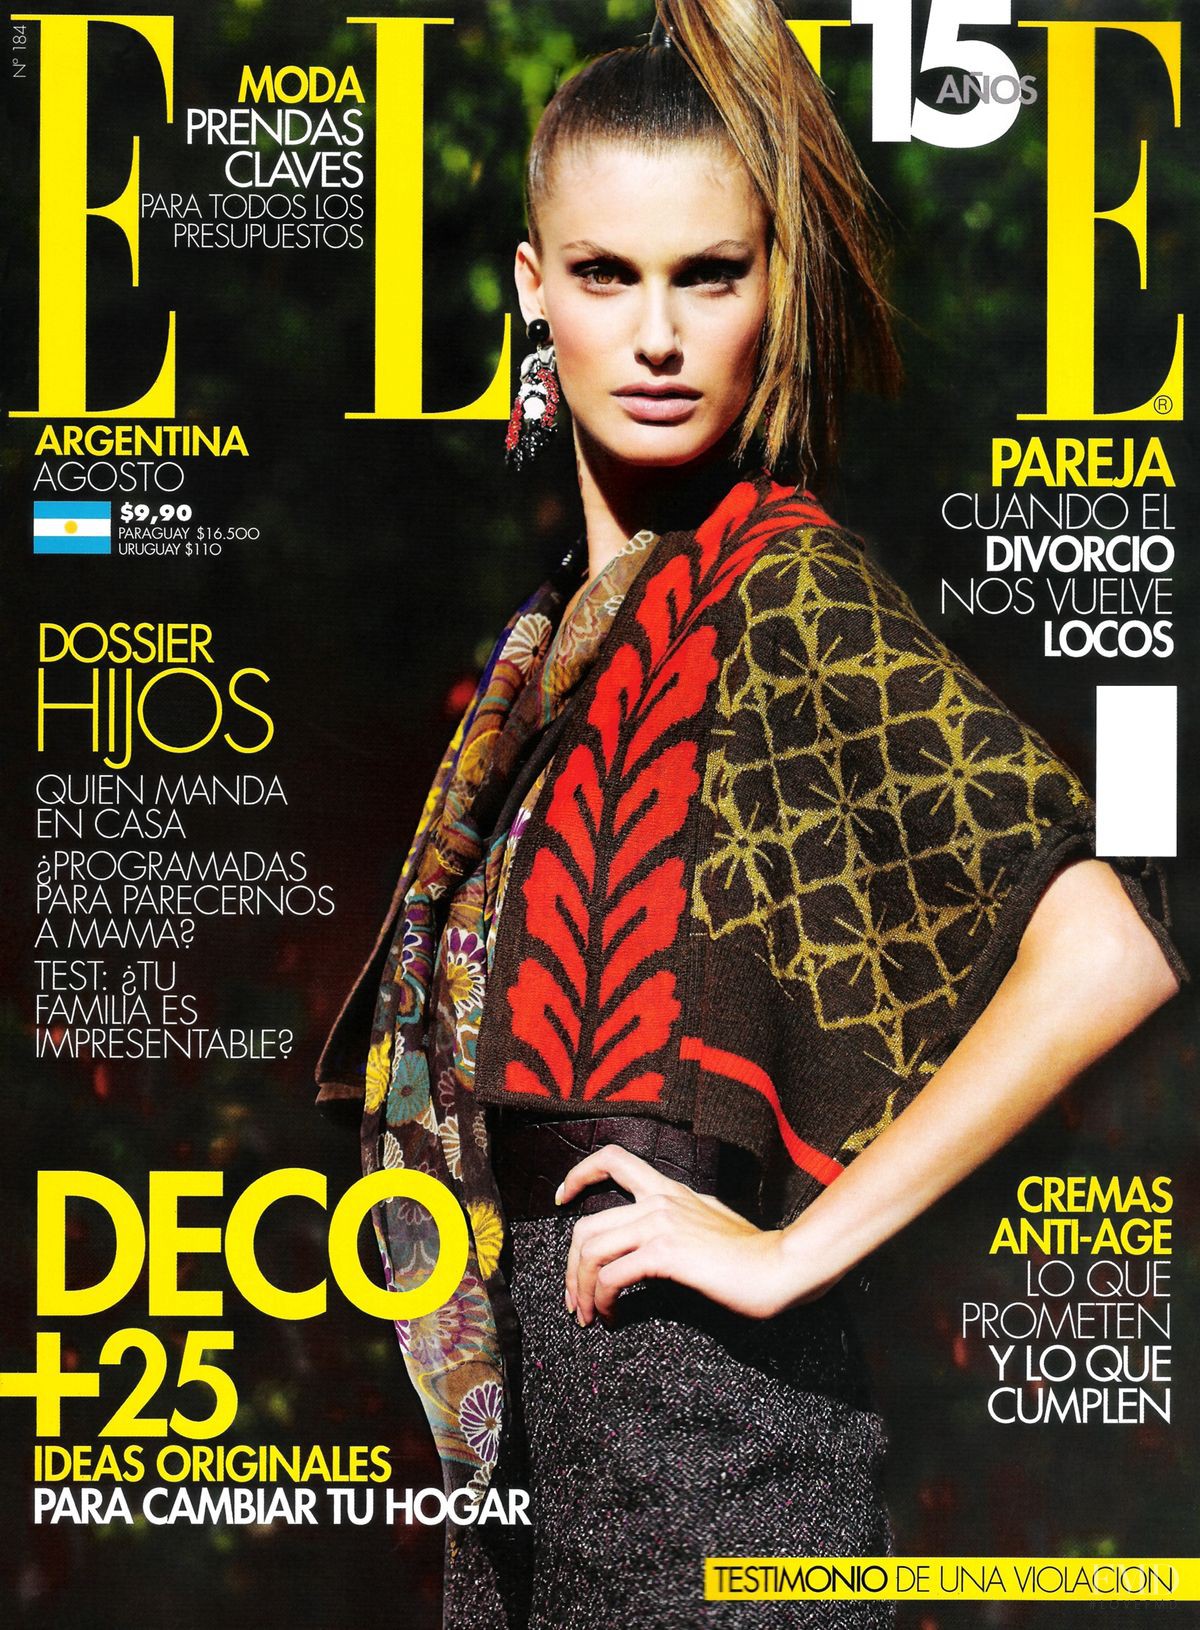 Cover of Elle Argentina with Caroline Francischini, August 2009 (ID ...